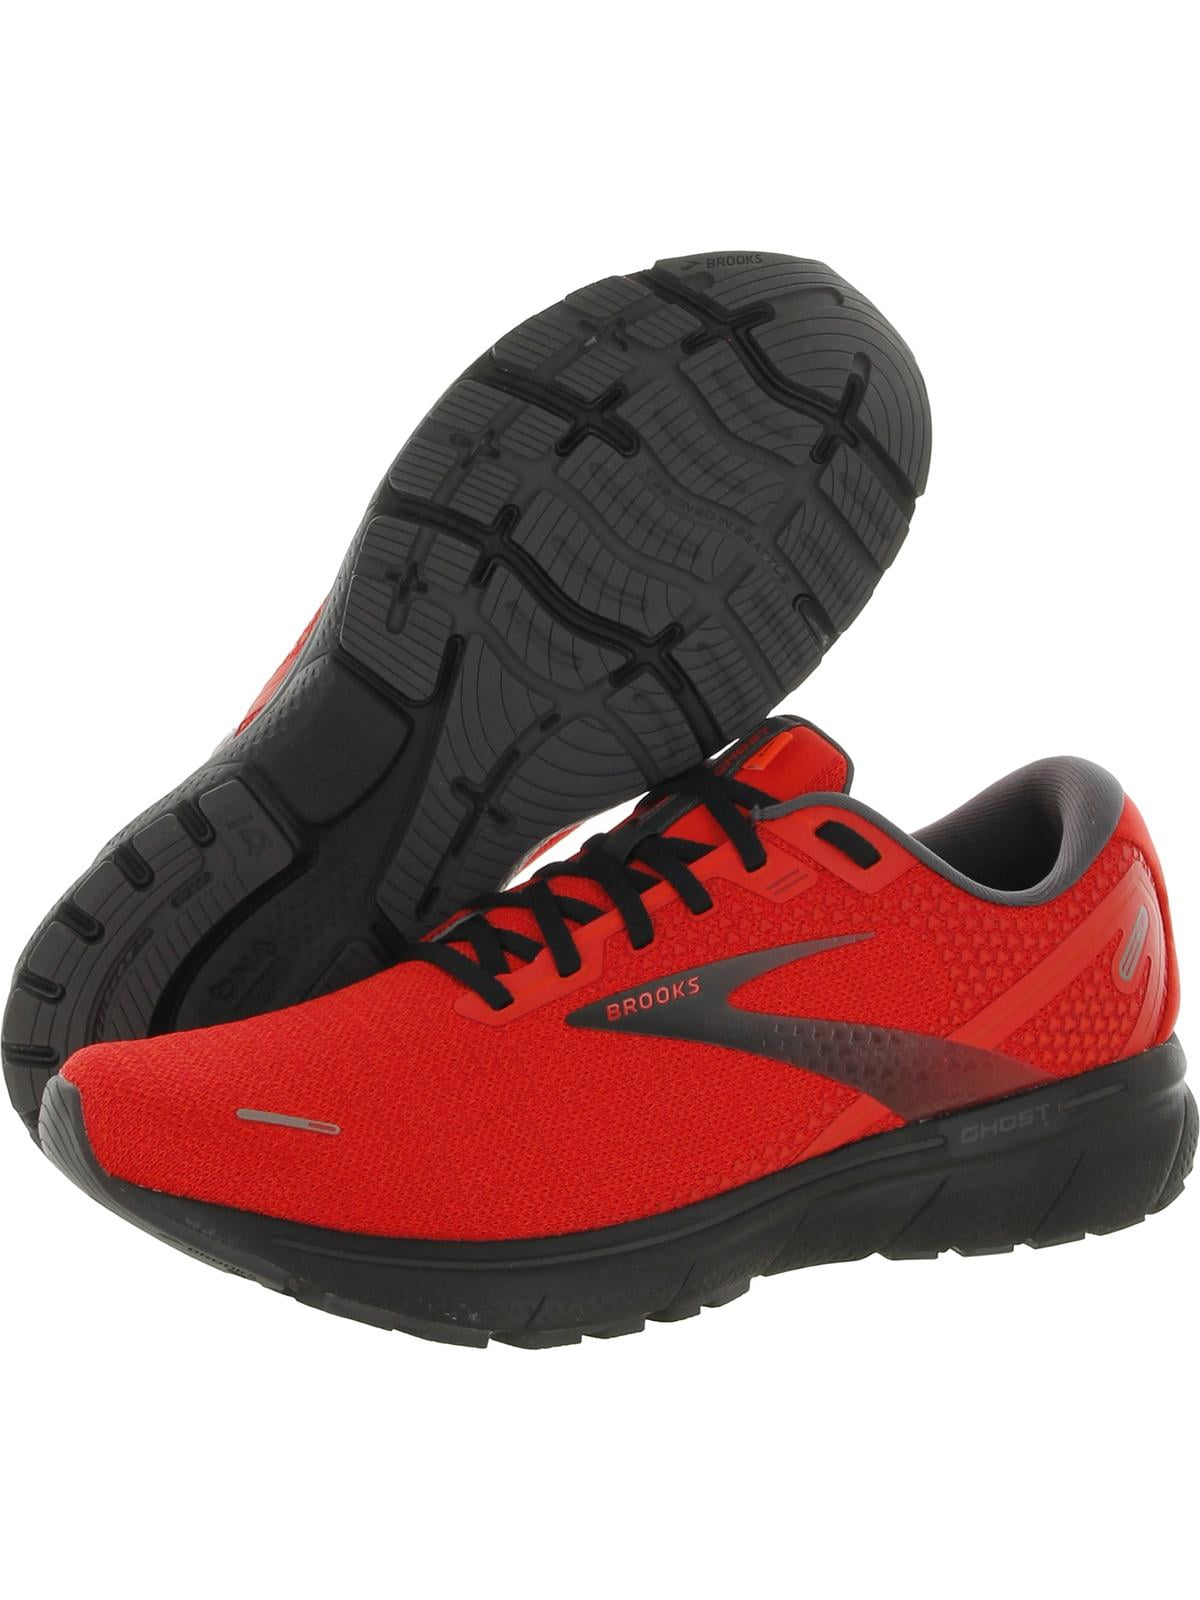 Men's leight Brooks Ghost 14 GTX Running Shoes, MeadowsprimaryShops, Free  Shipping $99+